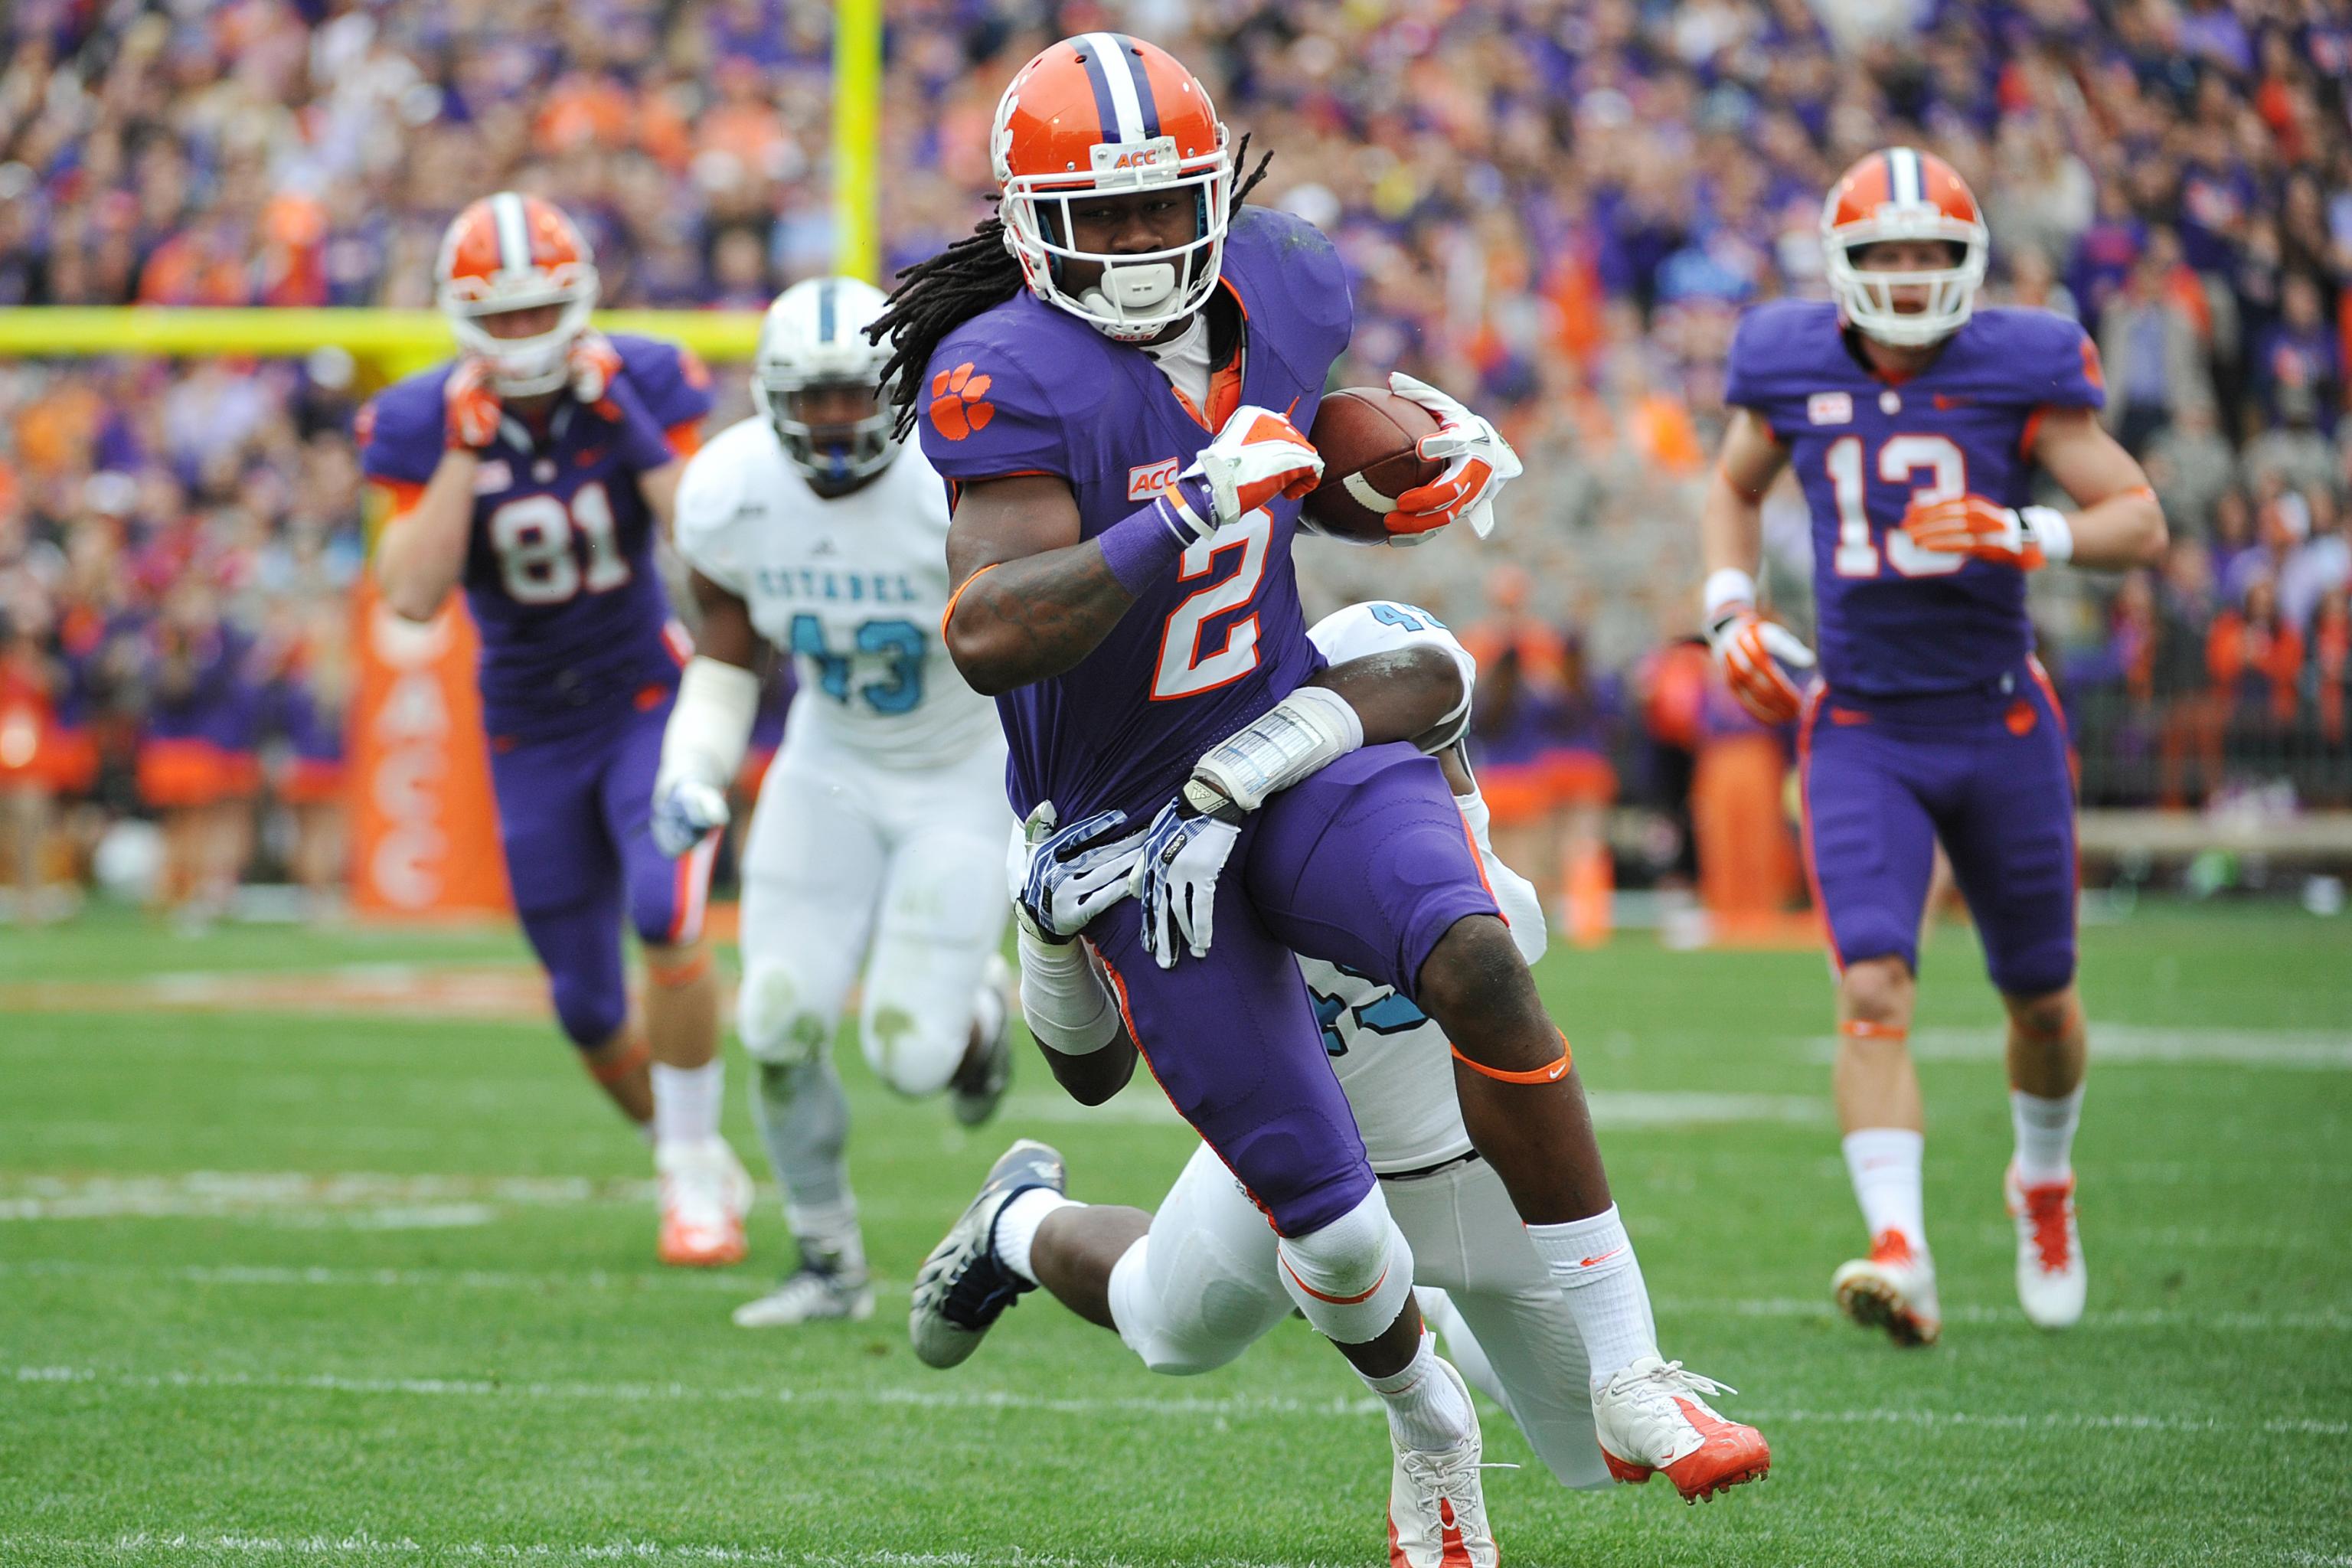 Clemson Football Predictions and Analysis for NFL DraftBound Players